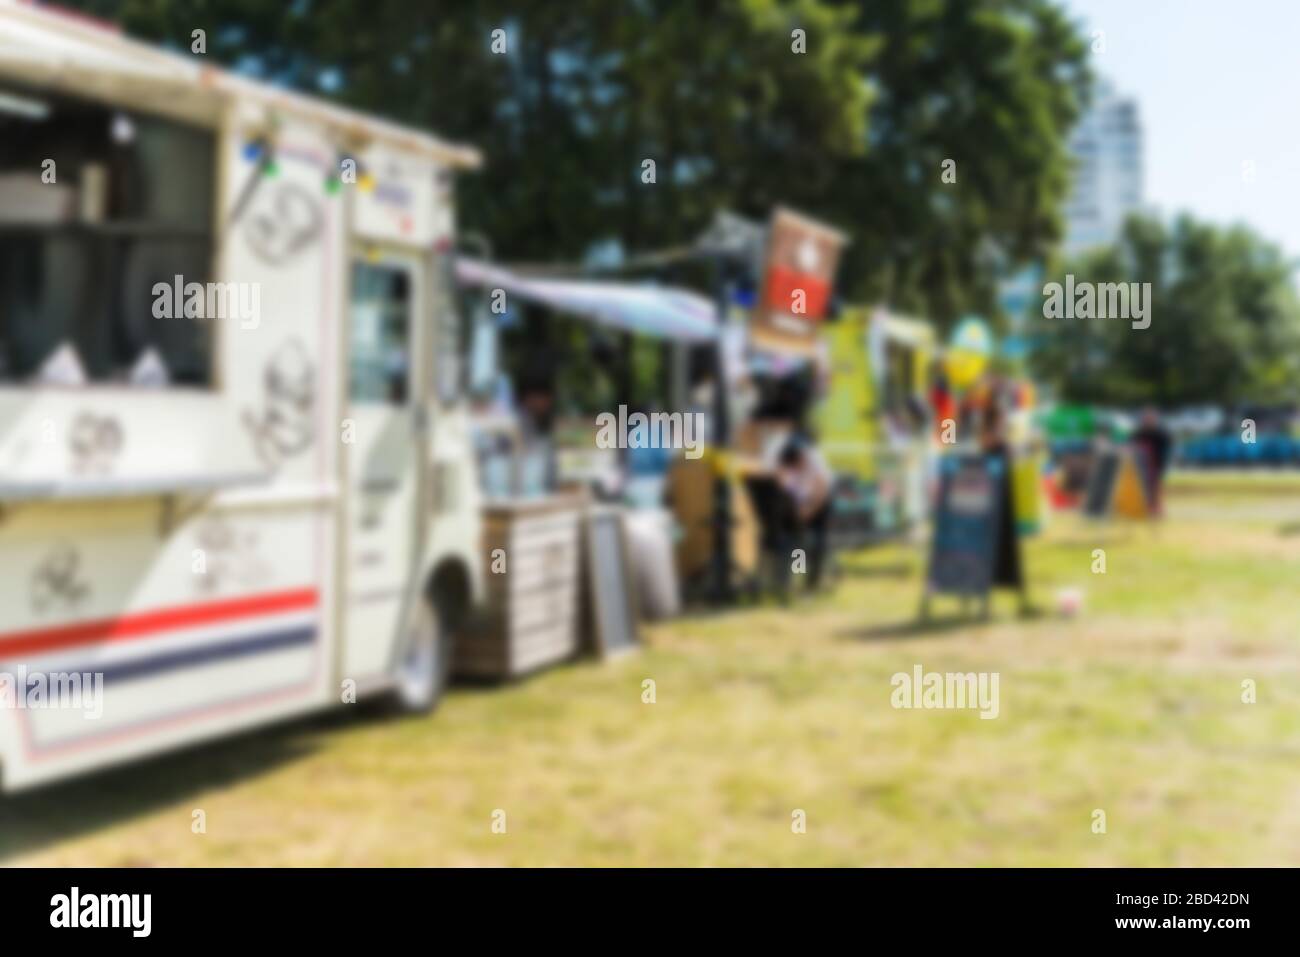 Food trucks and people at a street food market festival, blurred on purpose. Stock Photo